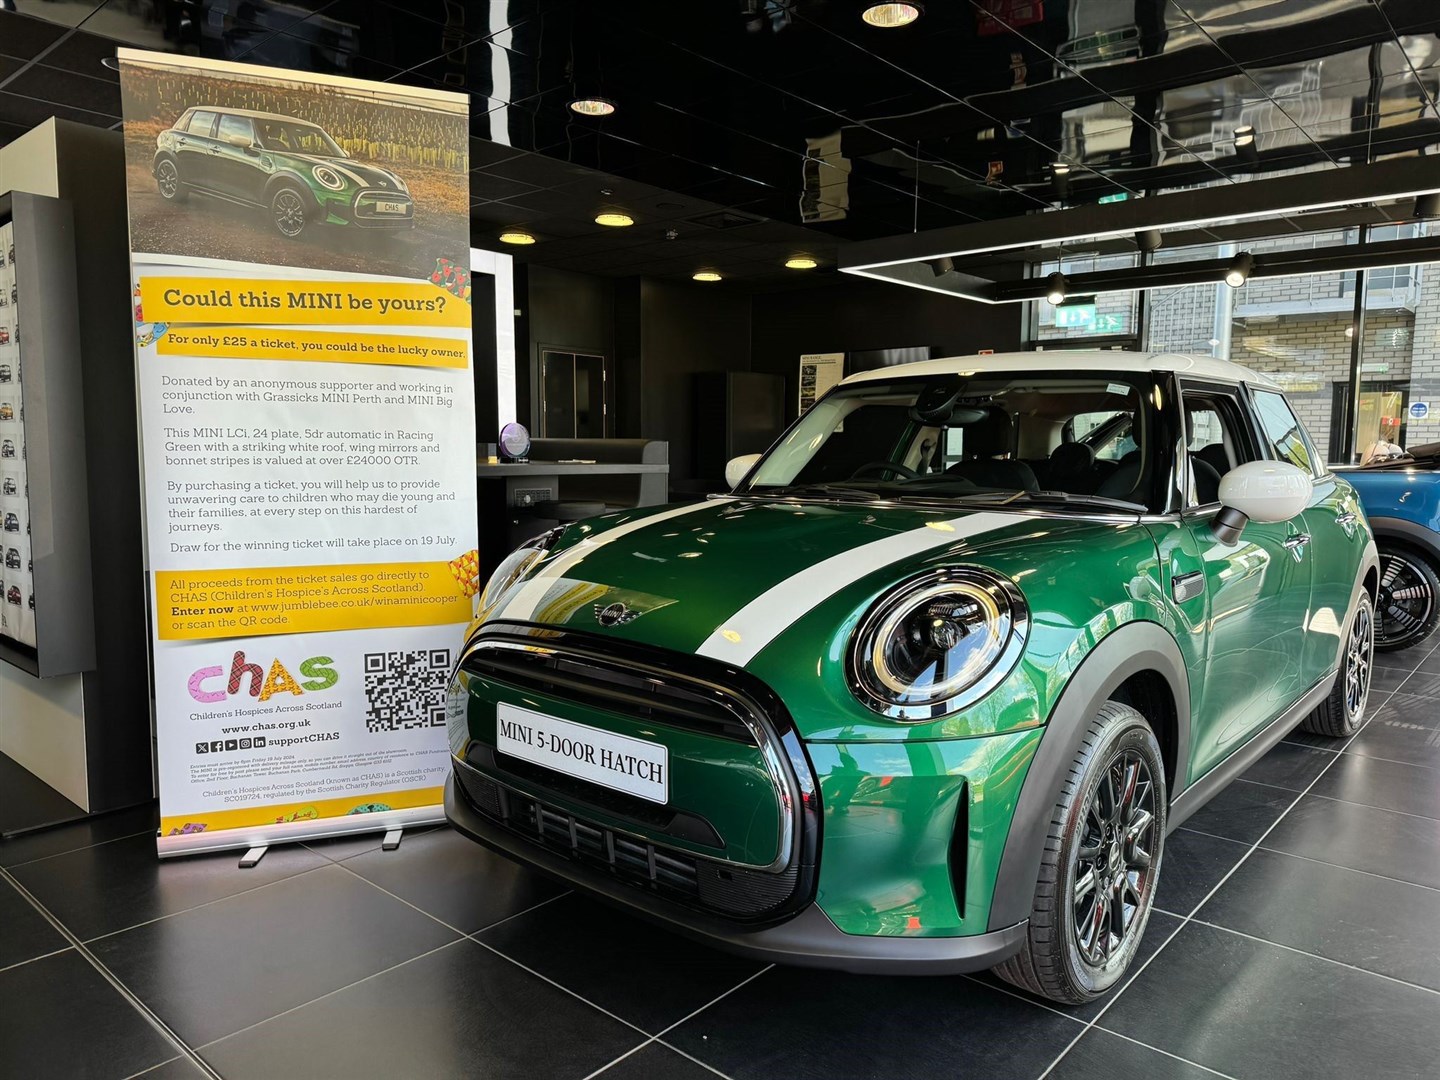 People can win a new Mini Cooper Classic as part of a prize draw in aid of Children’s Hospices Across Scotland.